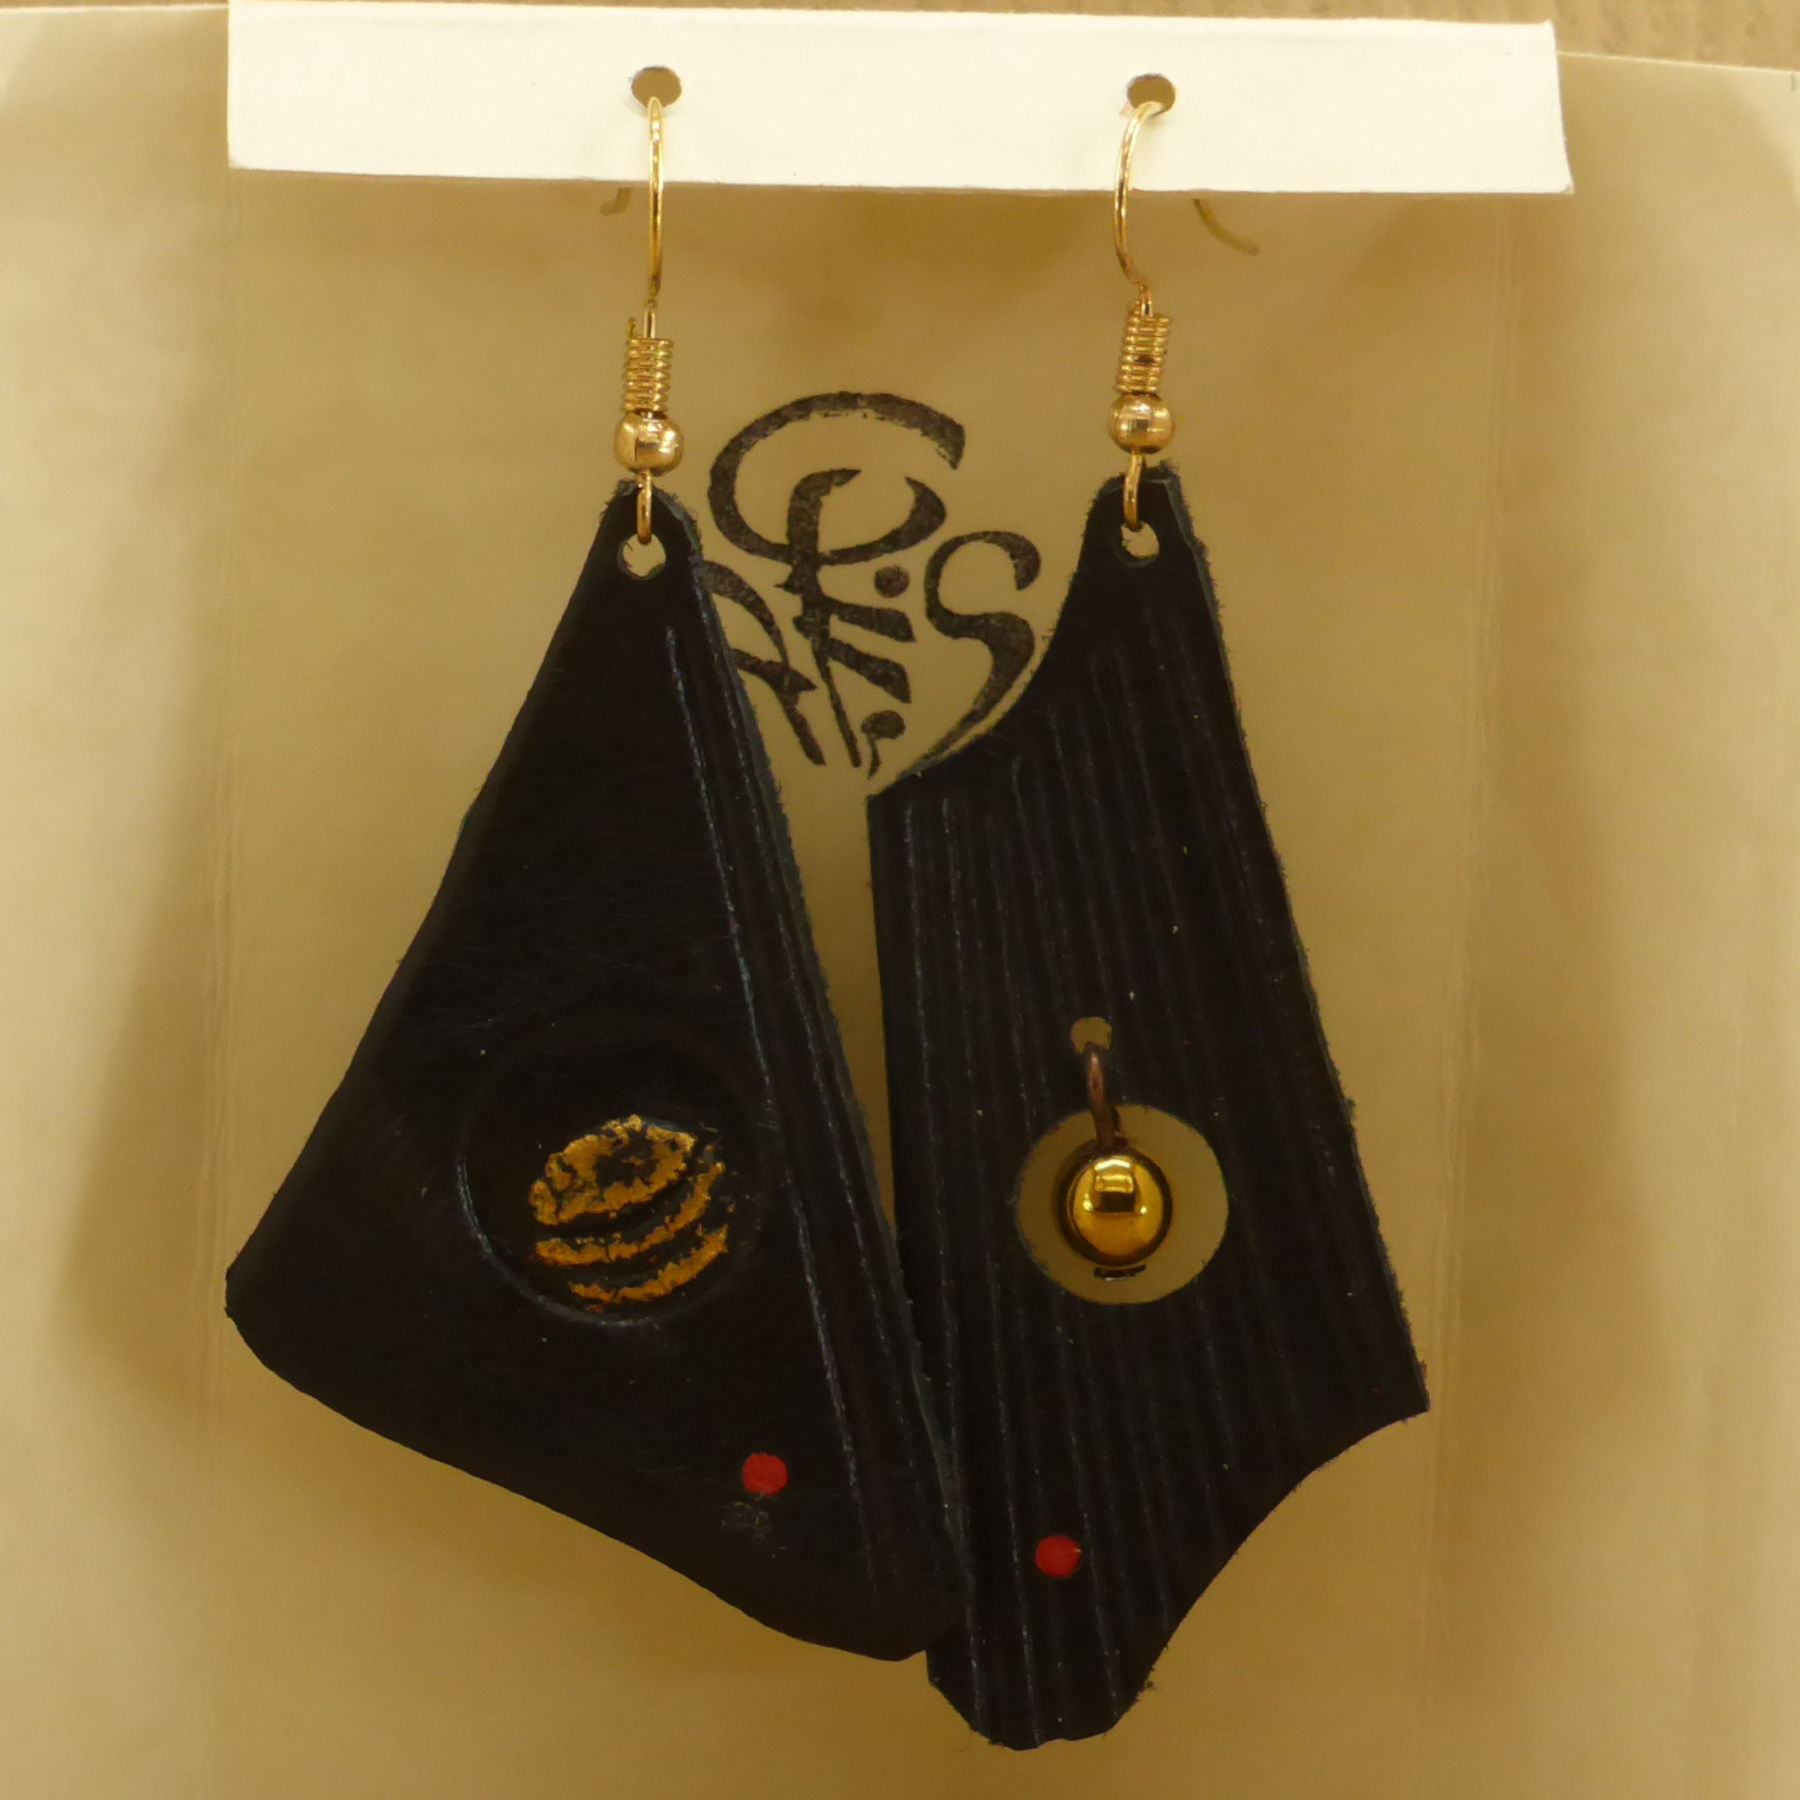 Asymmetrical earrings - Black leather, gilding and gold hematite pearl